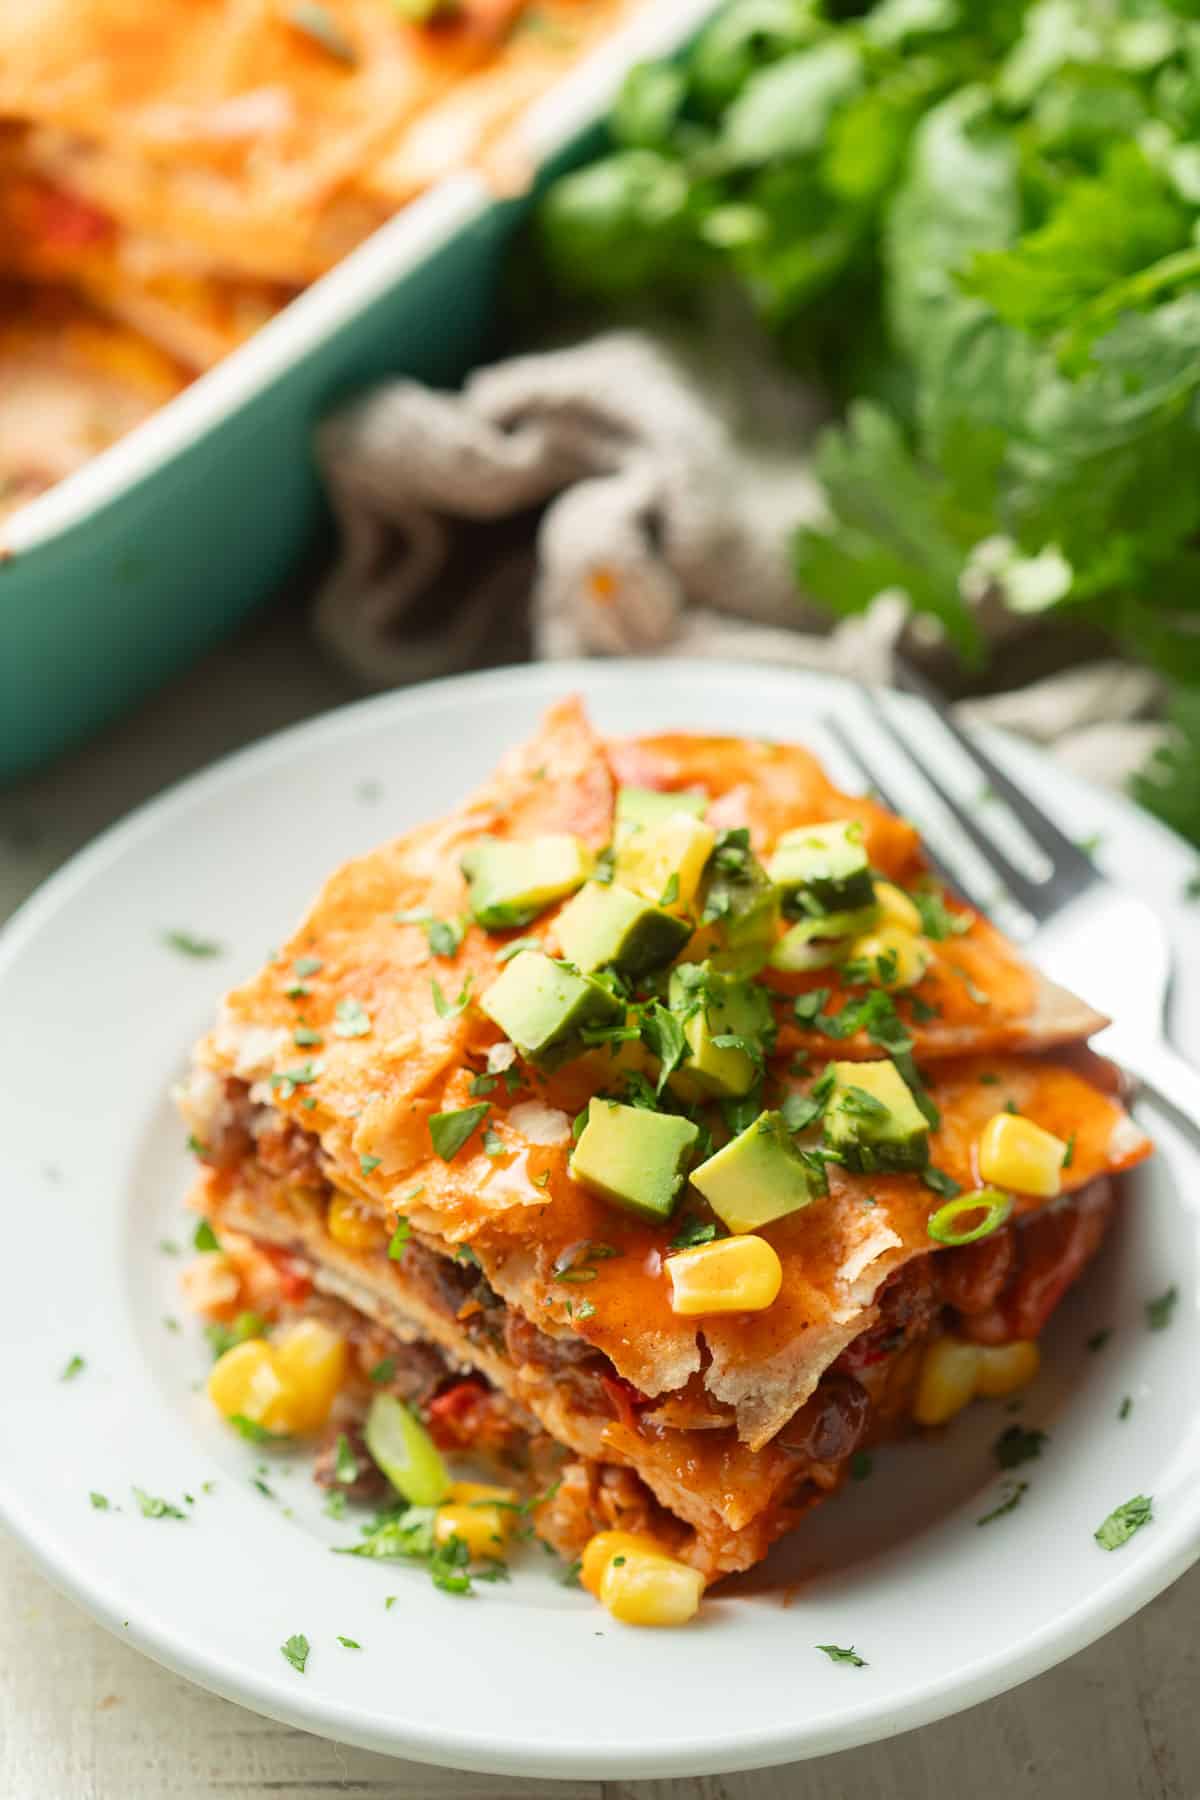 Slice of Vegan Enchilada Casserole on a dish with fork, baking dish and bunch of fresh cilantro in the background.